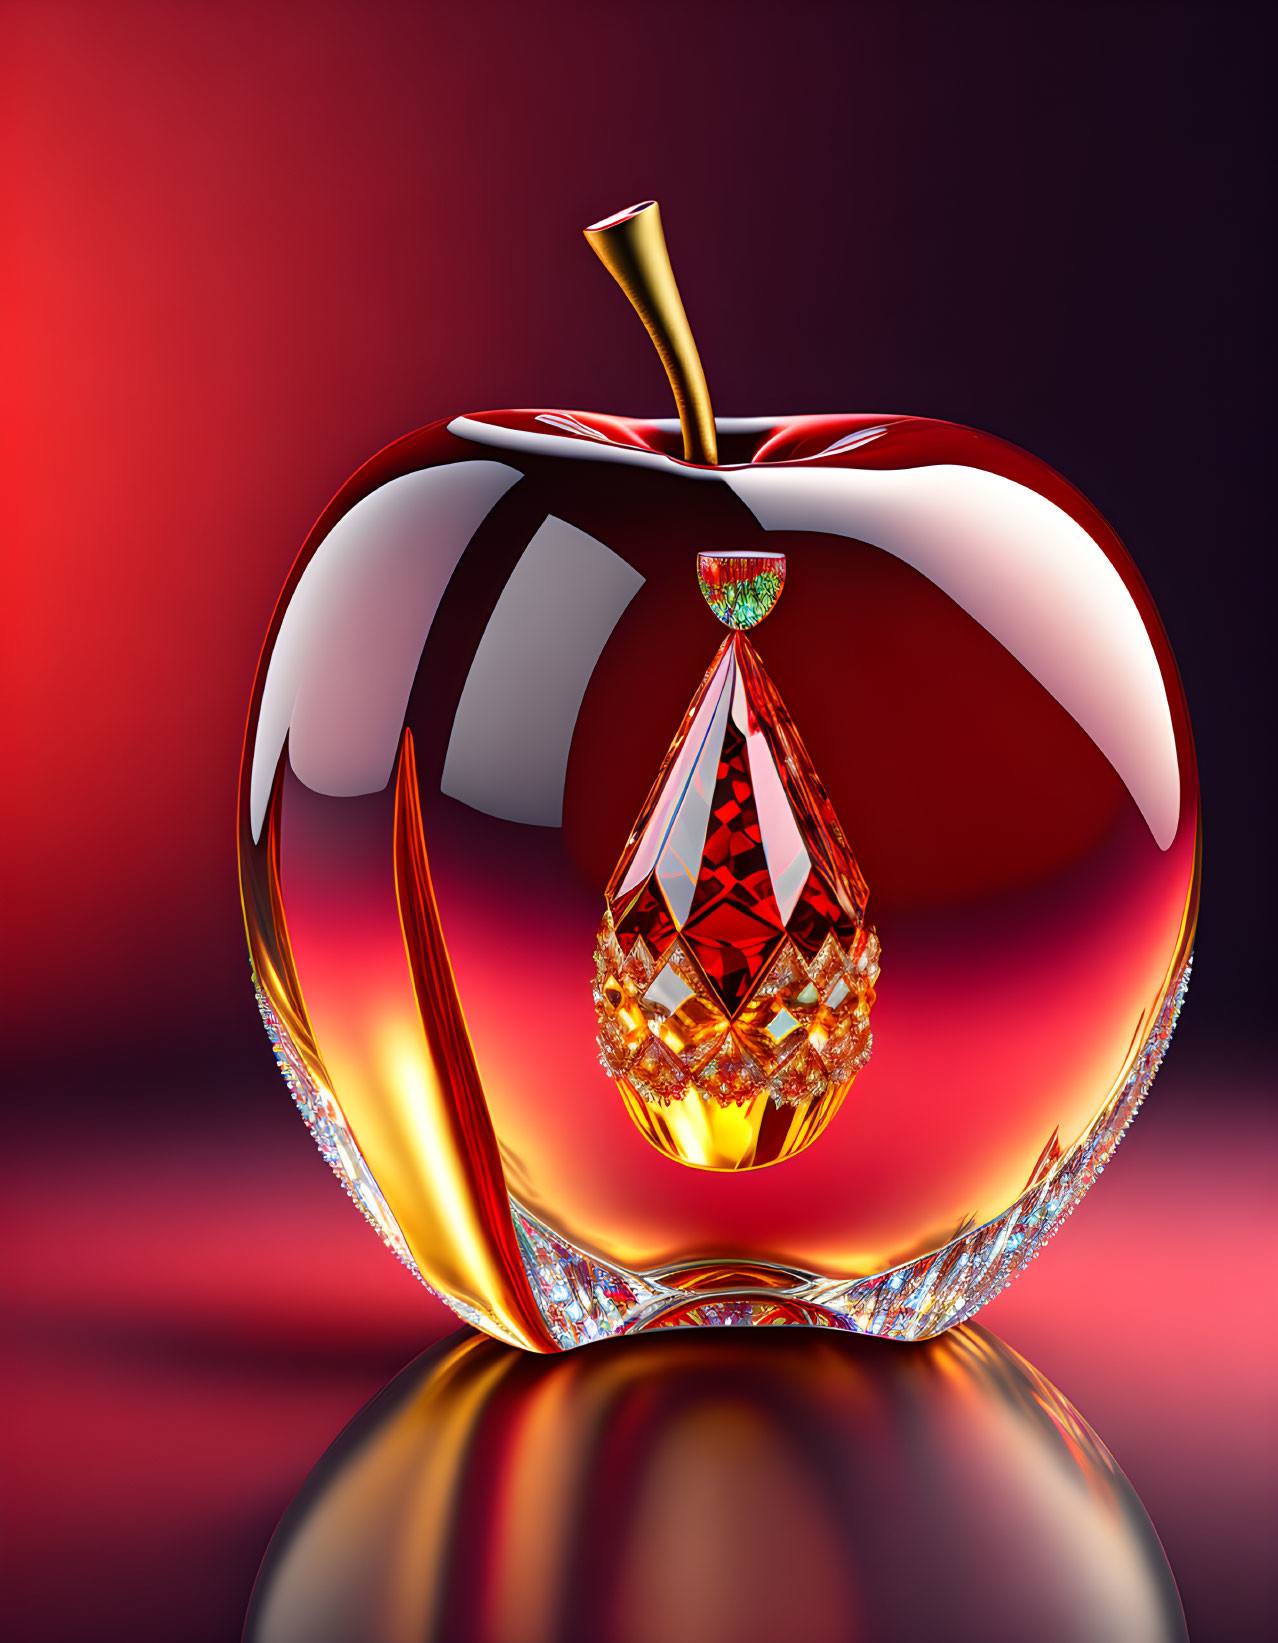 Shiny 3D Crystal Apple with Ruby-Like Core on Reflective Surface